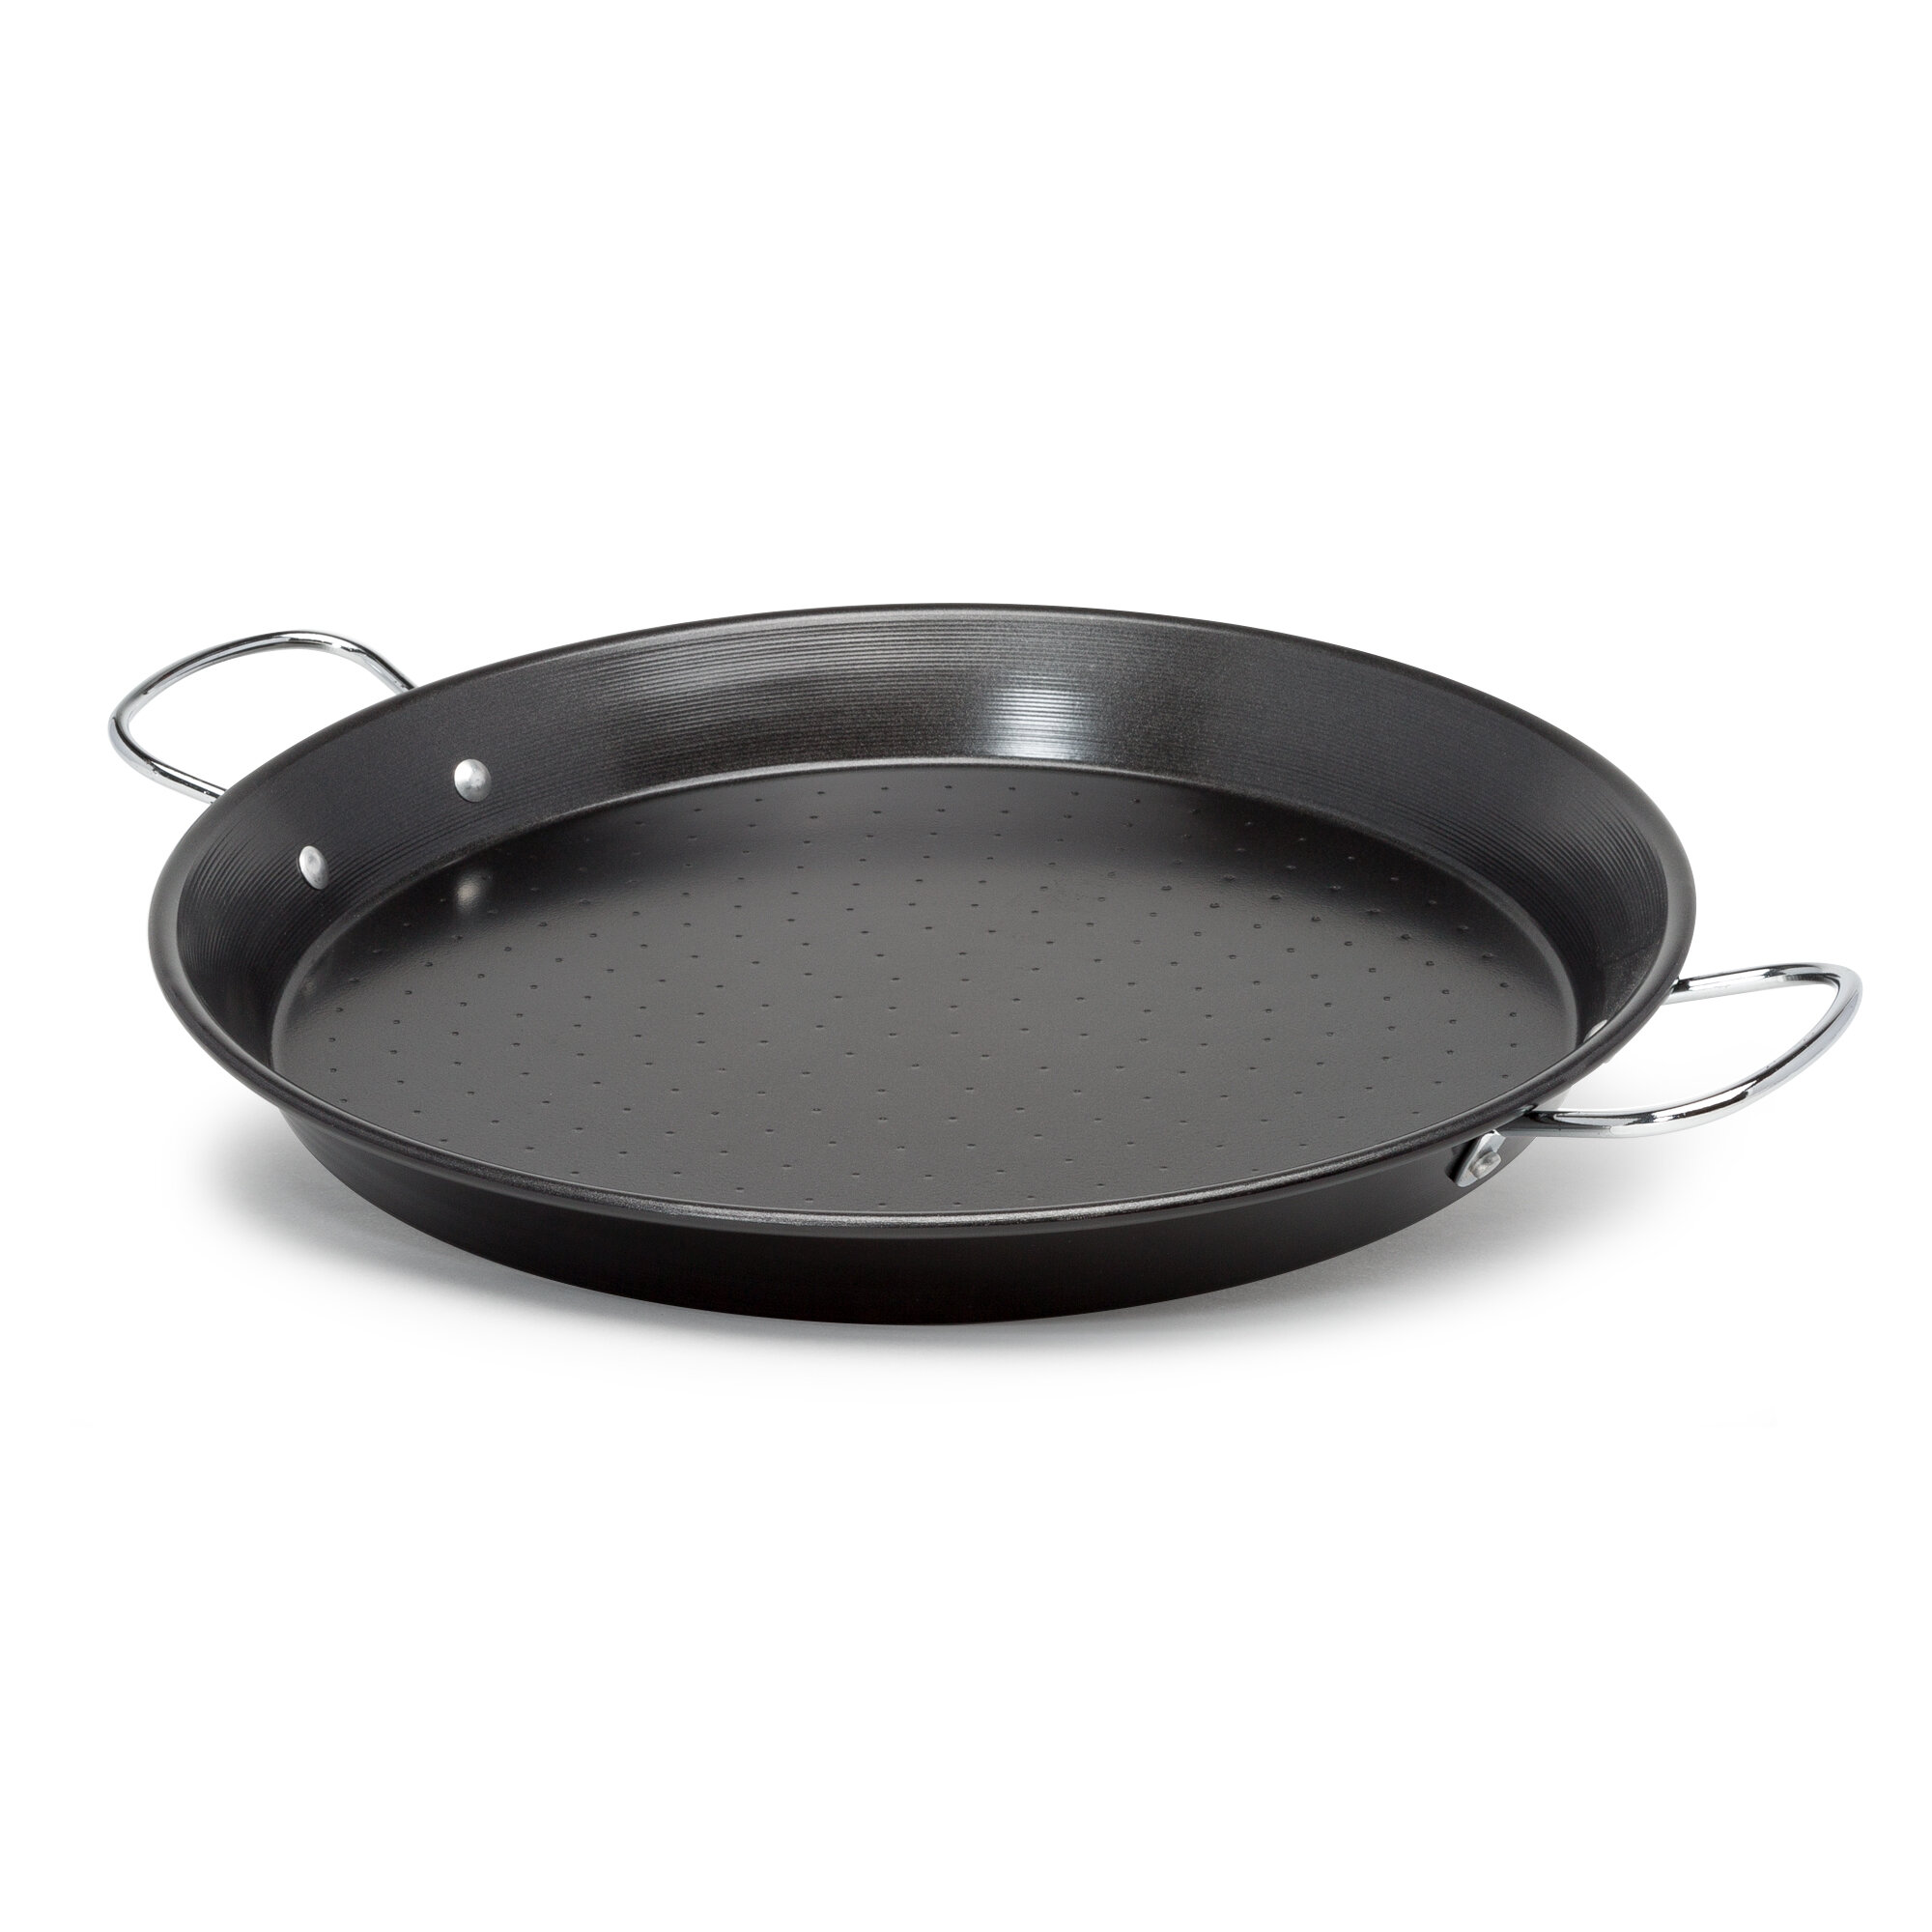 Professional Spanish ENAMELED STEEL Paella Pan PANS Heavy Duty ALL SIZES 